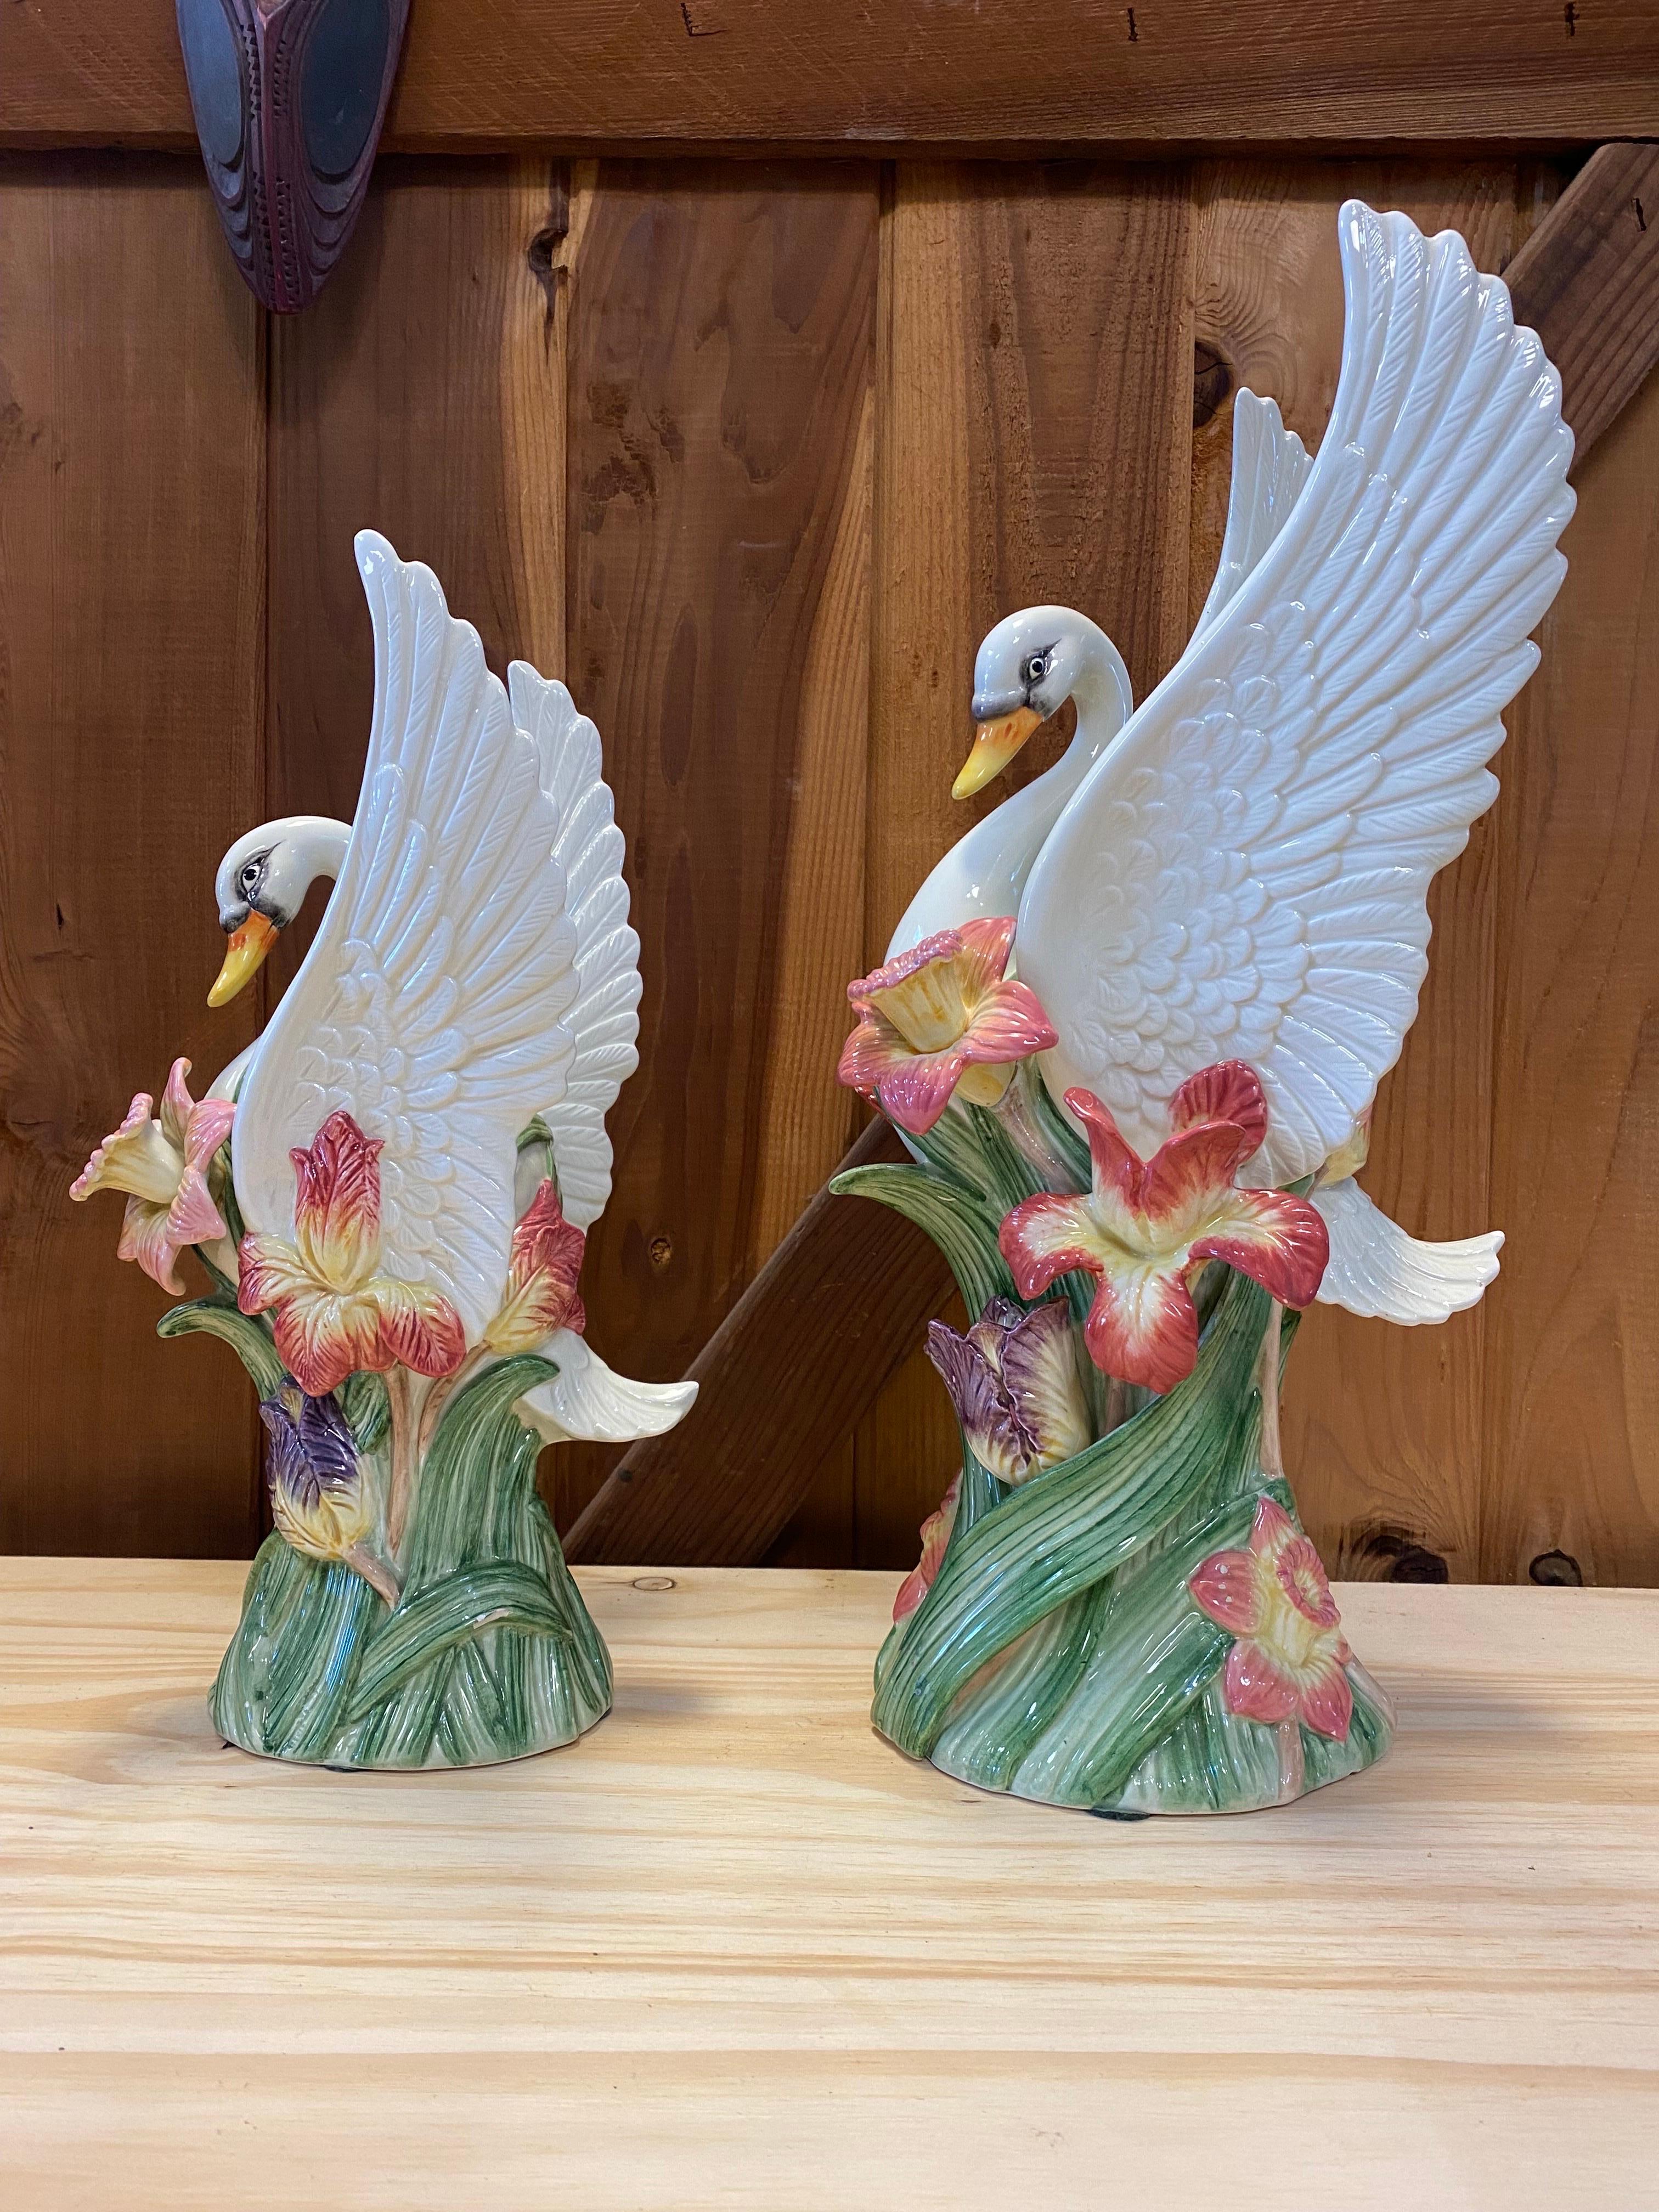 Beautiful set of 2 porcelain swan vases stretching their wings and surrounded by flowers, made by Fitz and Floyd. Both vases are in excellent condition except for a small chip on the tail of the large swan which you can see in picture 7. 

The large